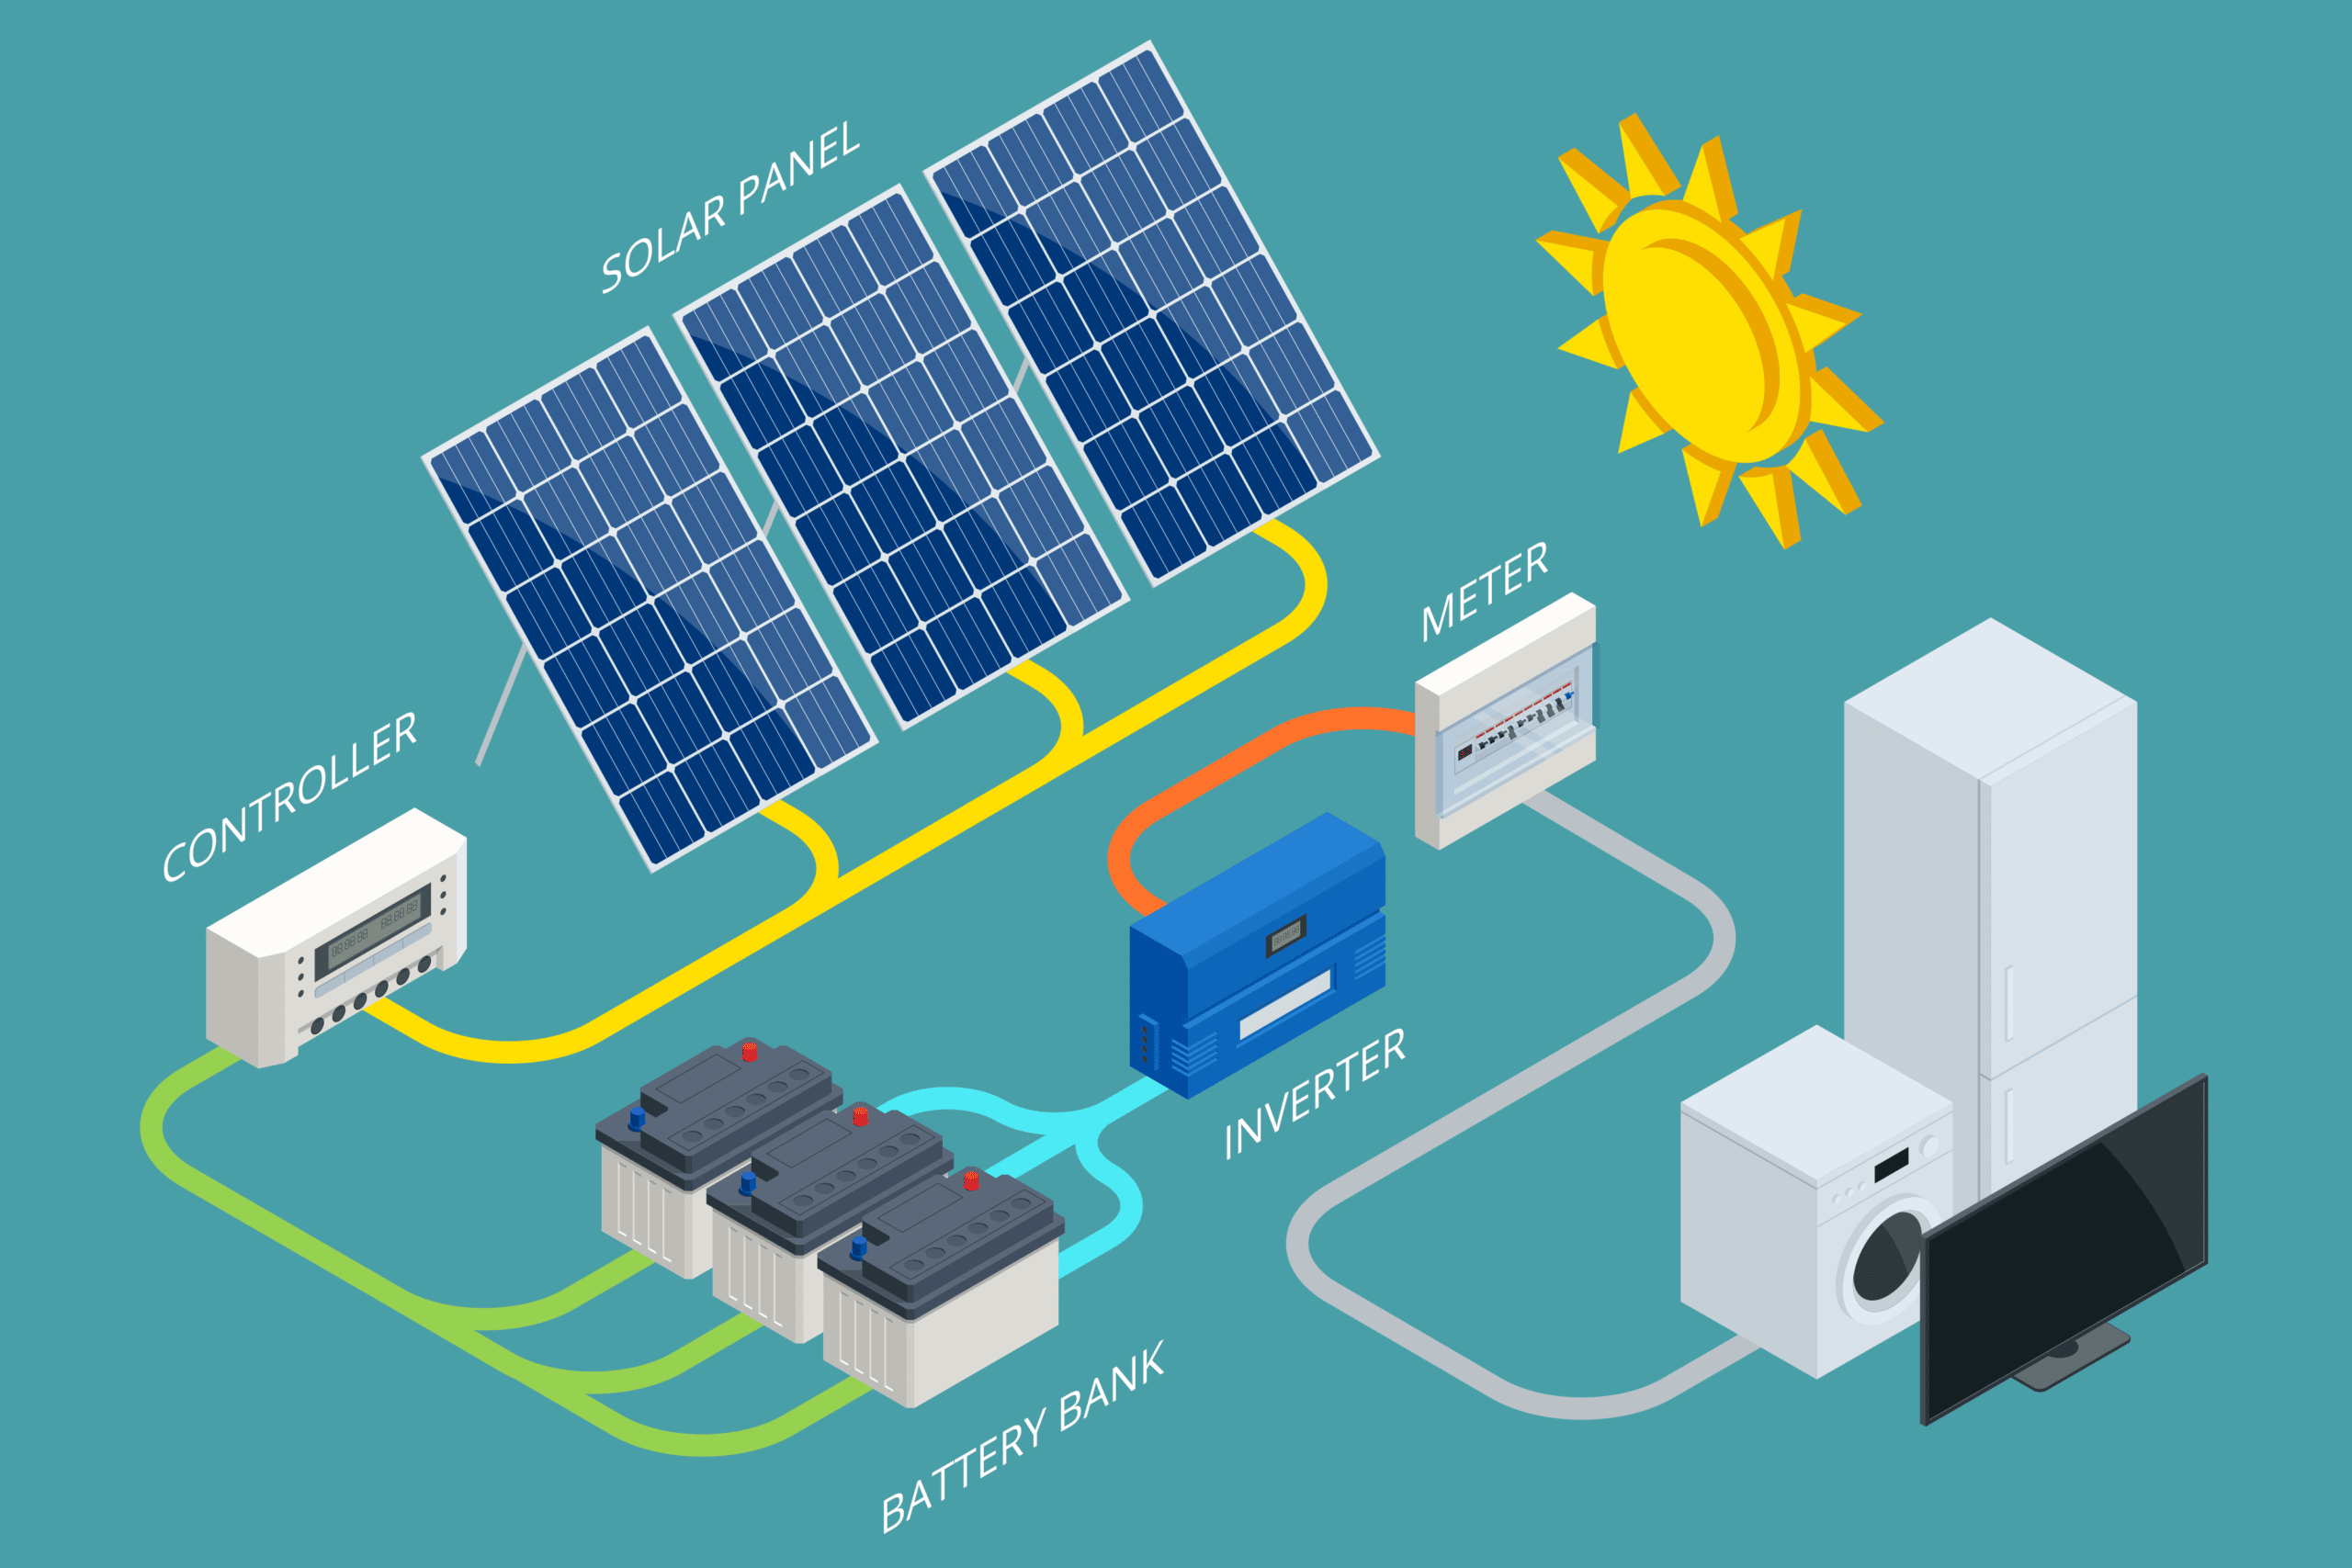 https://renergyinfo.com/5-free-solar-energy-courses-to-boost-your-carrier-by-energy-swaraj/